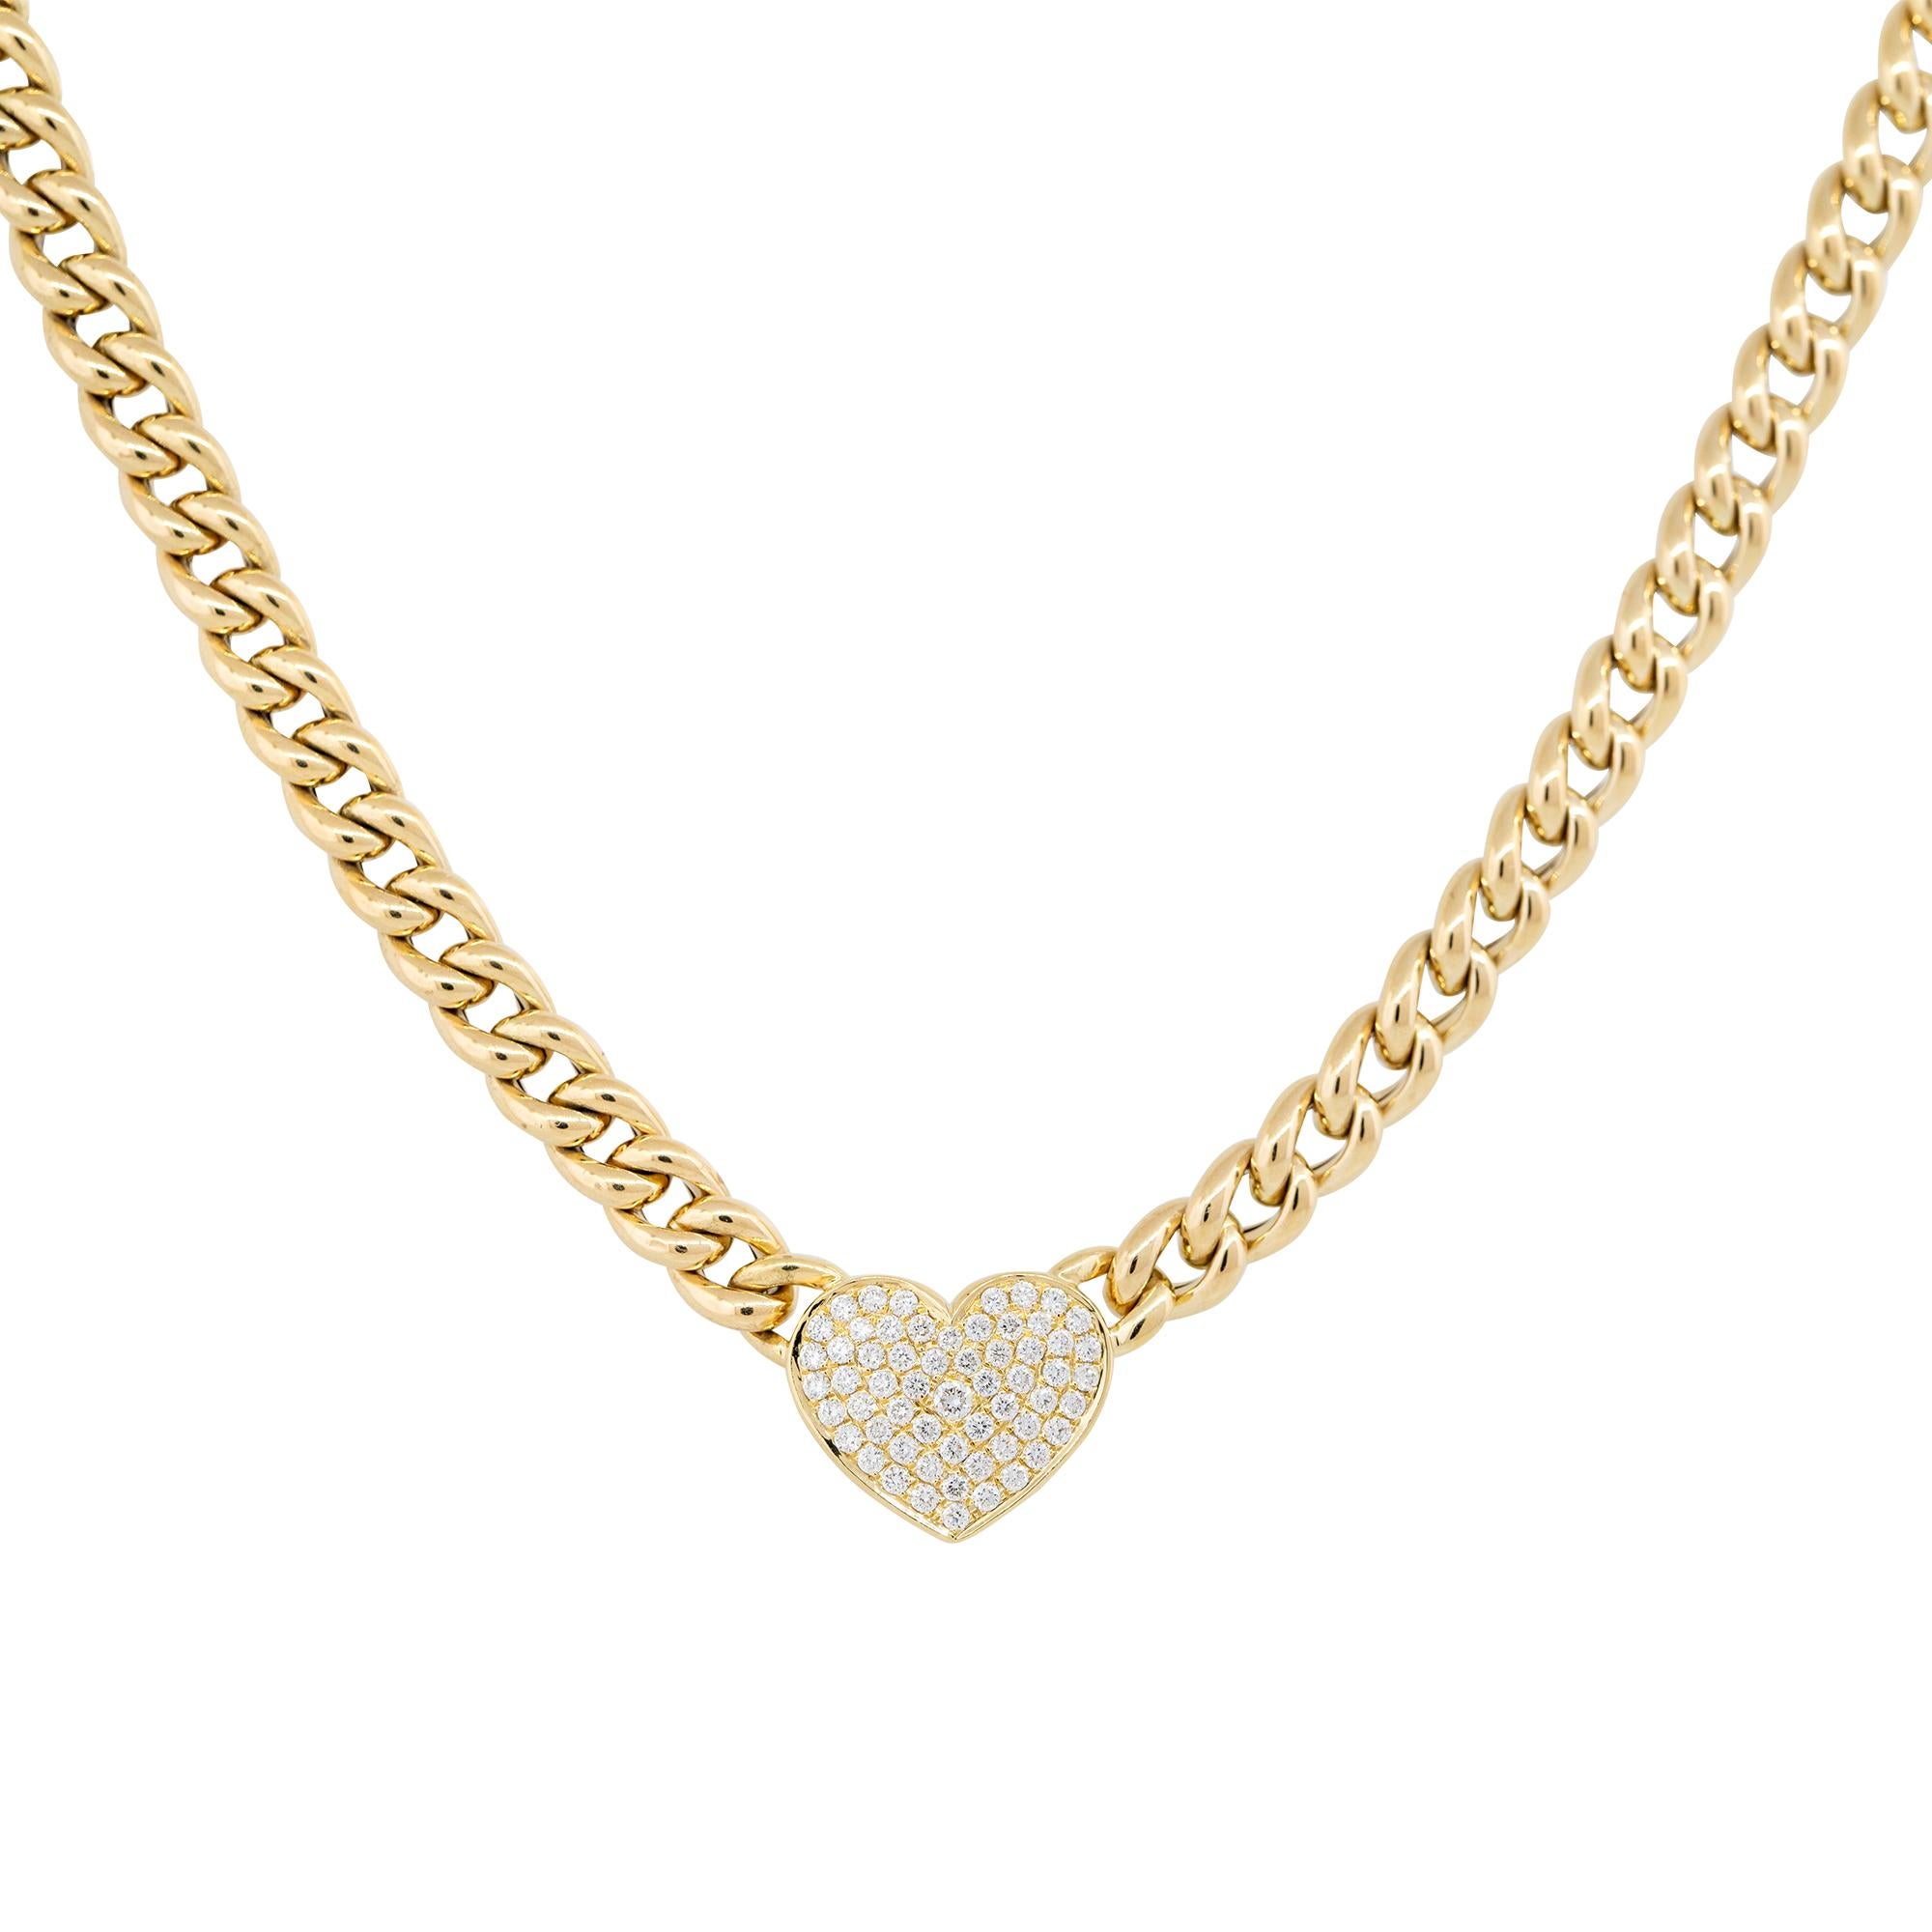 18k Yellow Gold 0.67ctw Pave Diamond Heart on Curb Link Necklace

Product: Pave Diamond Heart Necklace
Material: 18k Yellow Gold
Diamond Details: There are approximately 0.67 carats of Round Brilliant cut diamonds
Diamond Clarity: Diamonds are